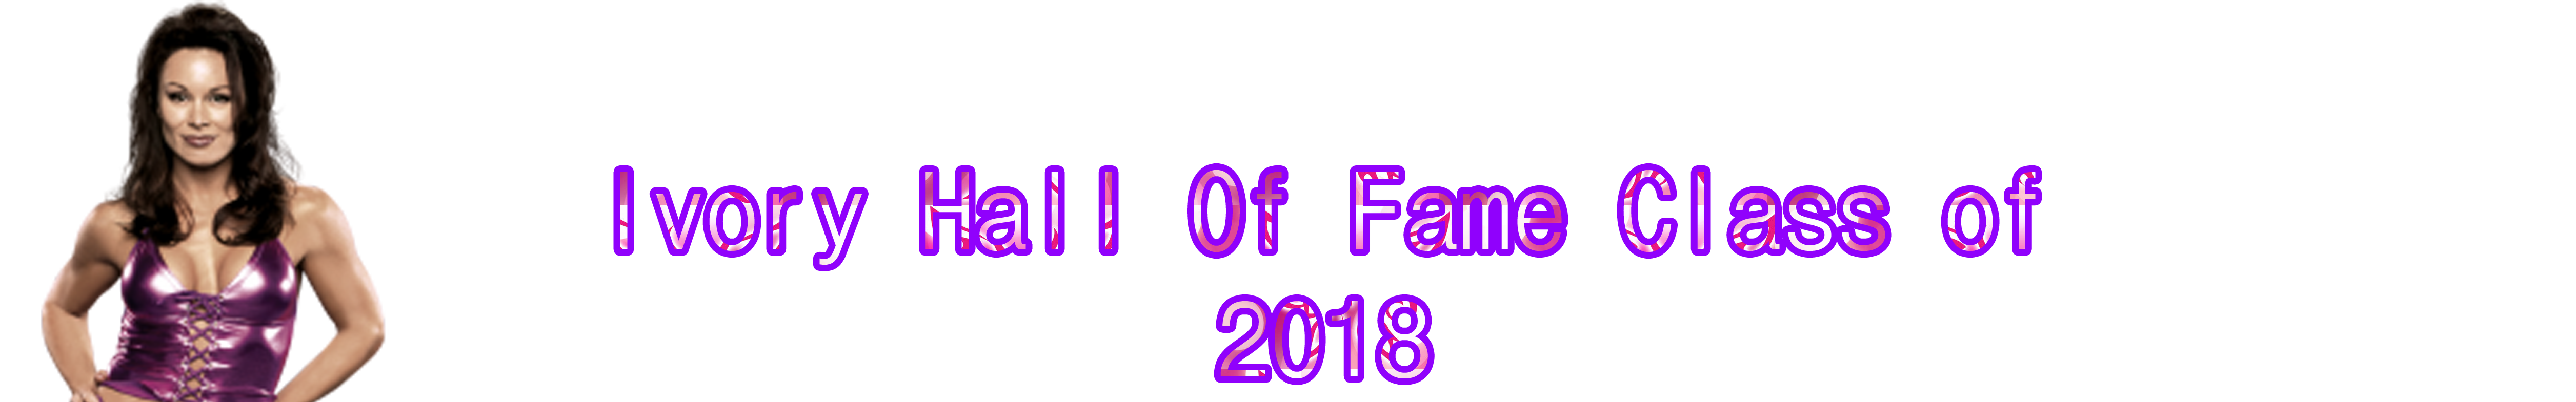 Wwe Hall Of Fame 2018 Women Of Wrestling Videos